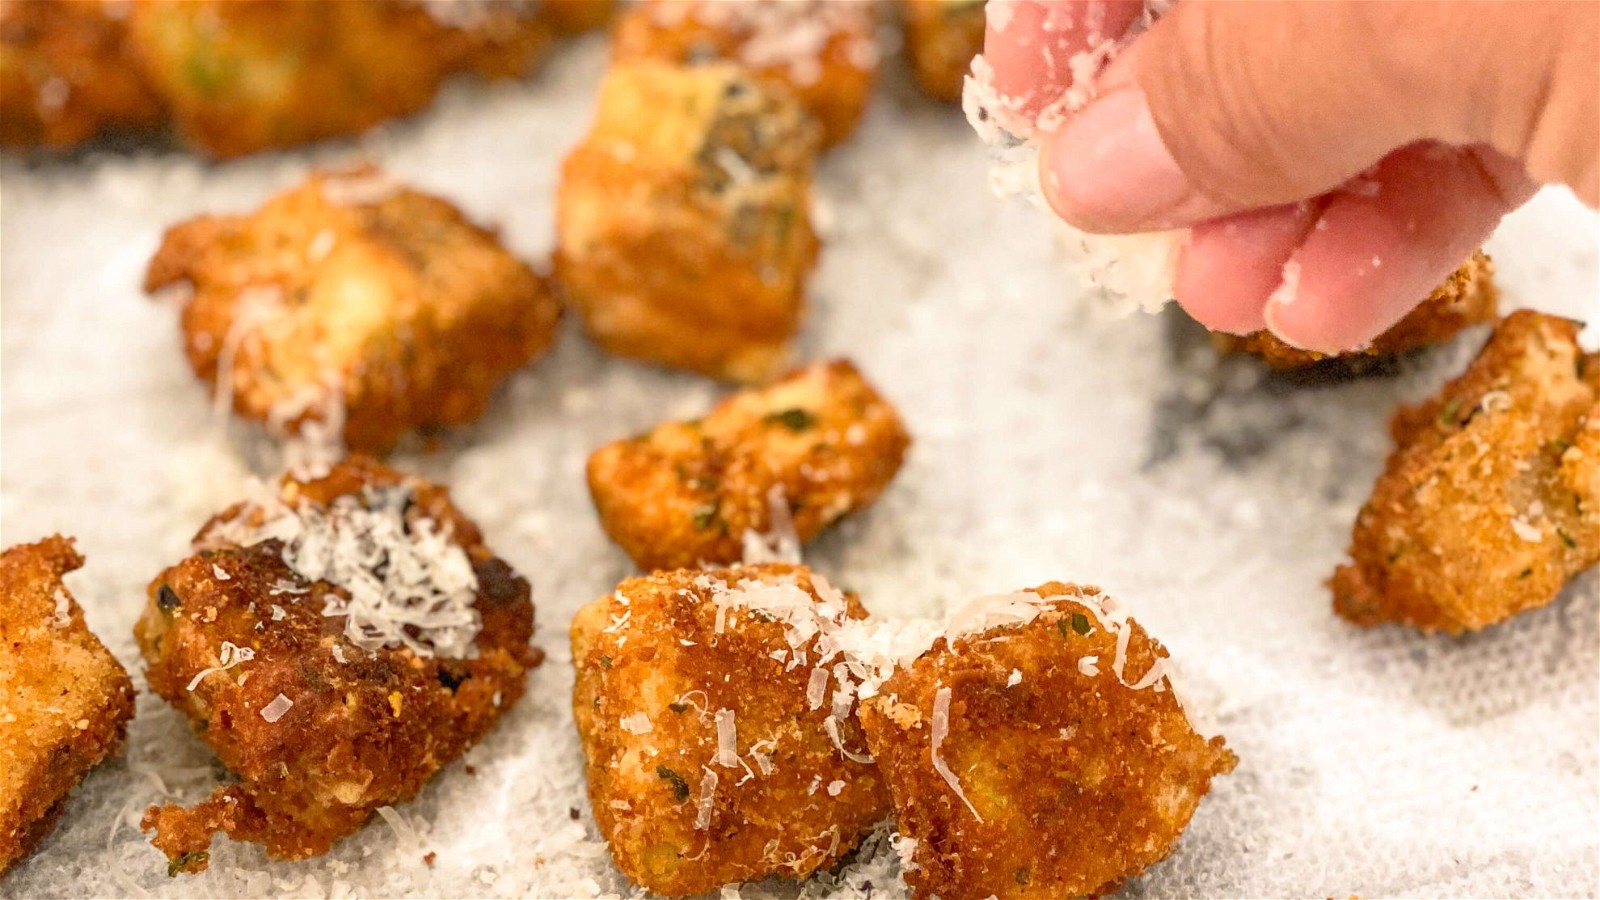 Image of Fried Eggplant Crouton with Rosemary Sea Salt